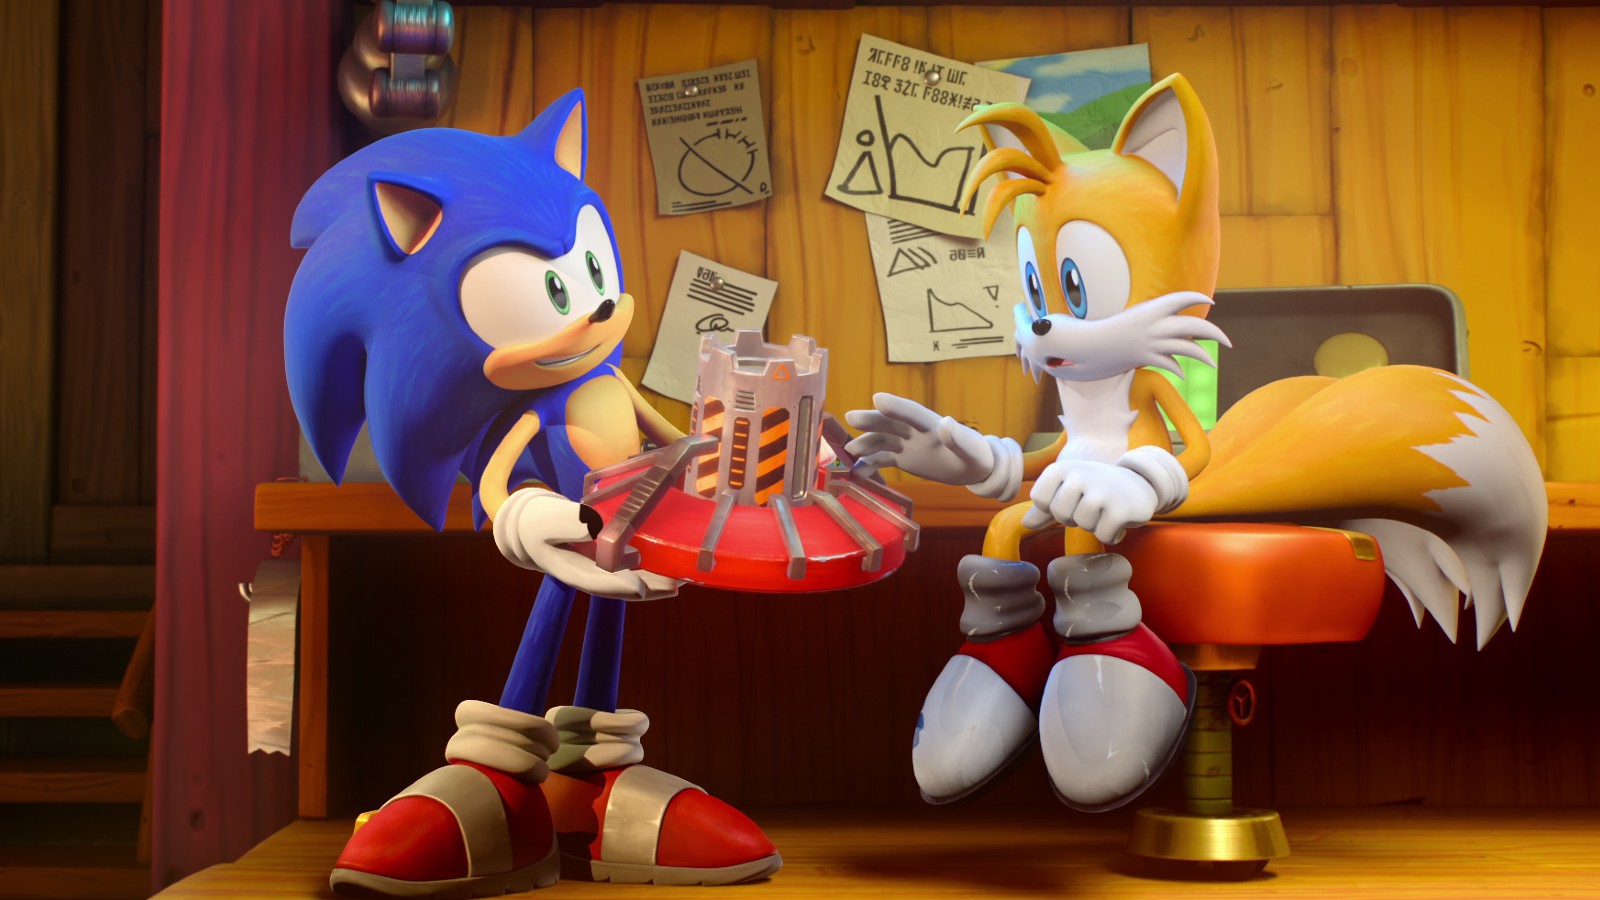 Sonic Prime' Netflix Review: Stream It or Skip It?